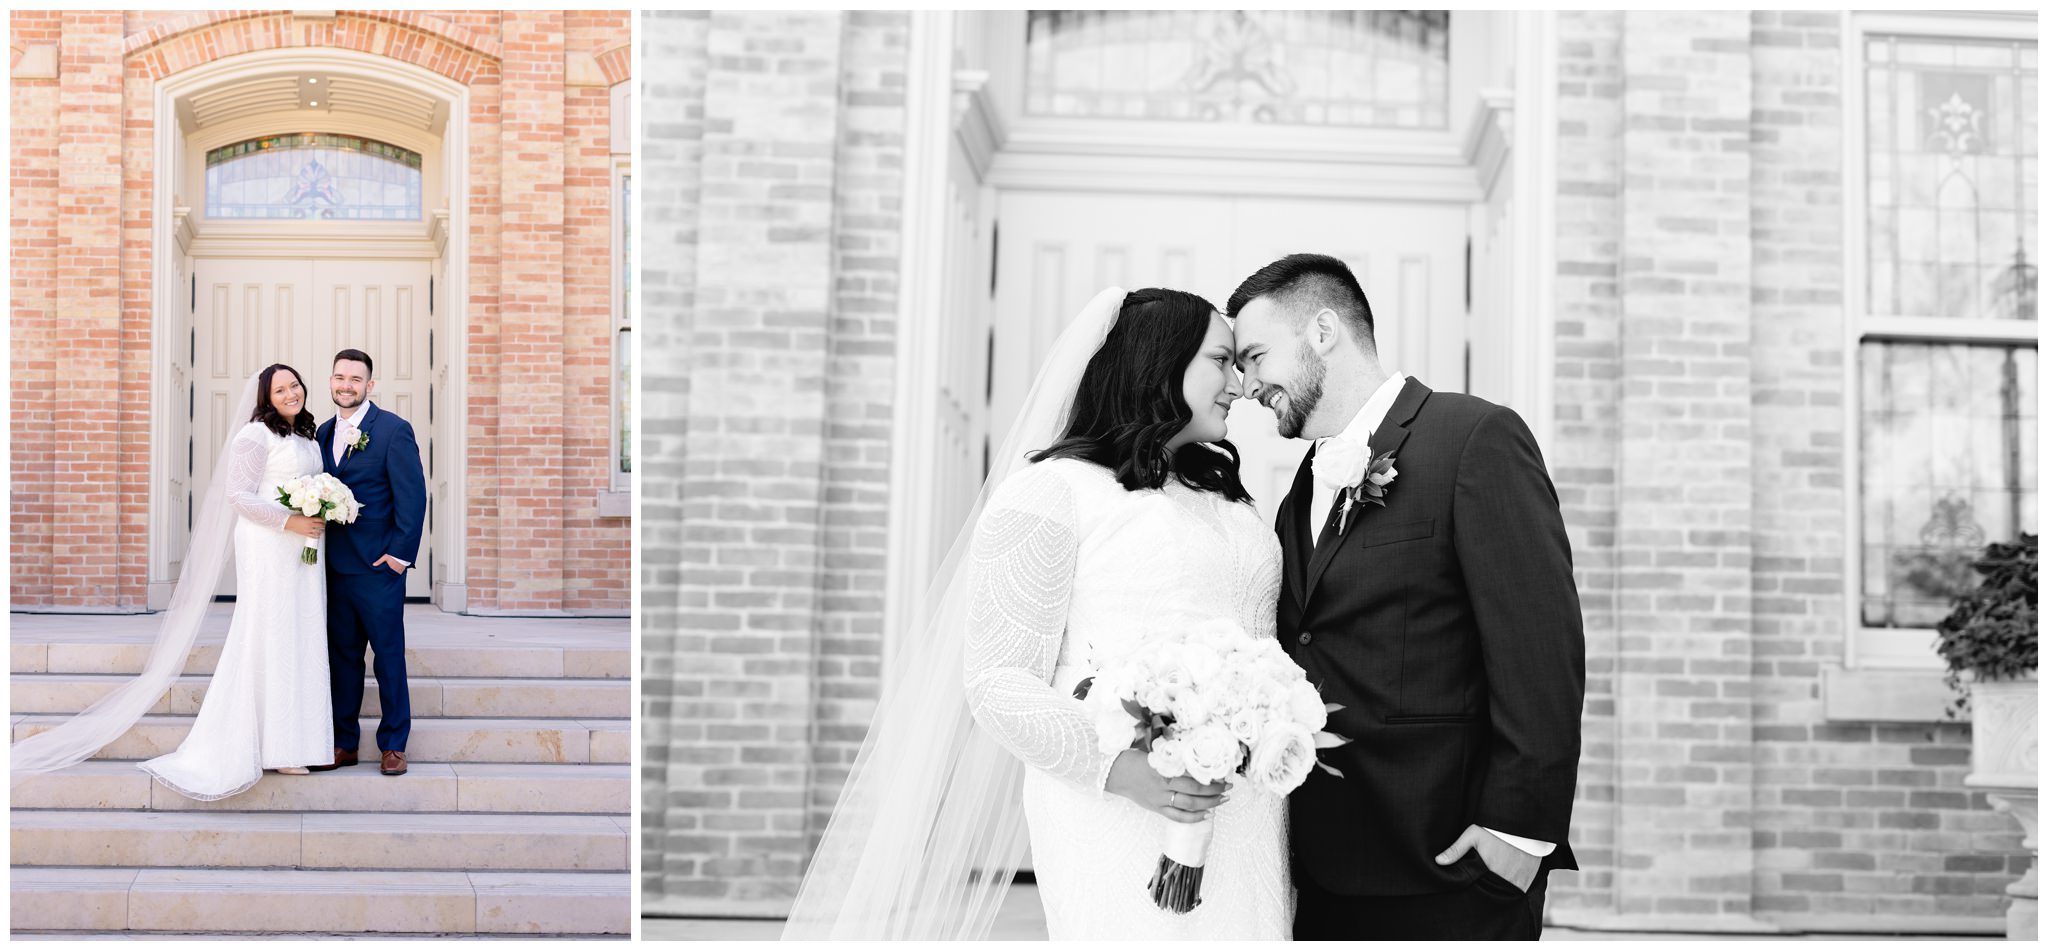 Utah Valley Bride and Groom at the Provo City Center Temple 